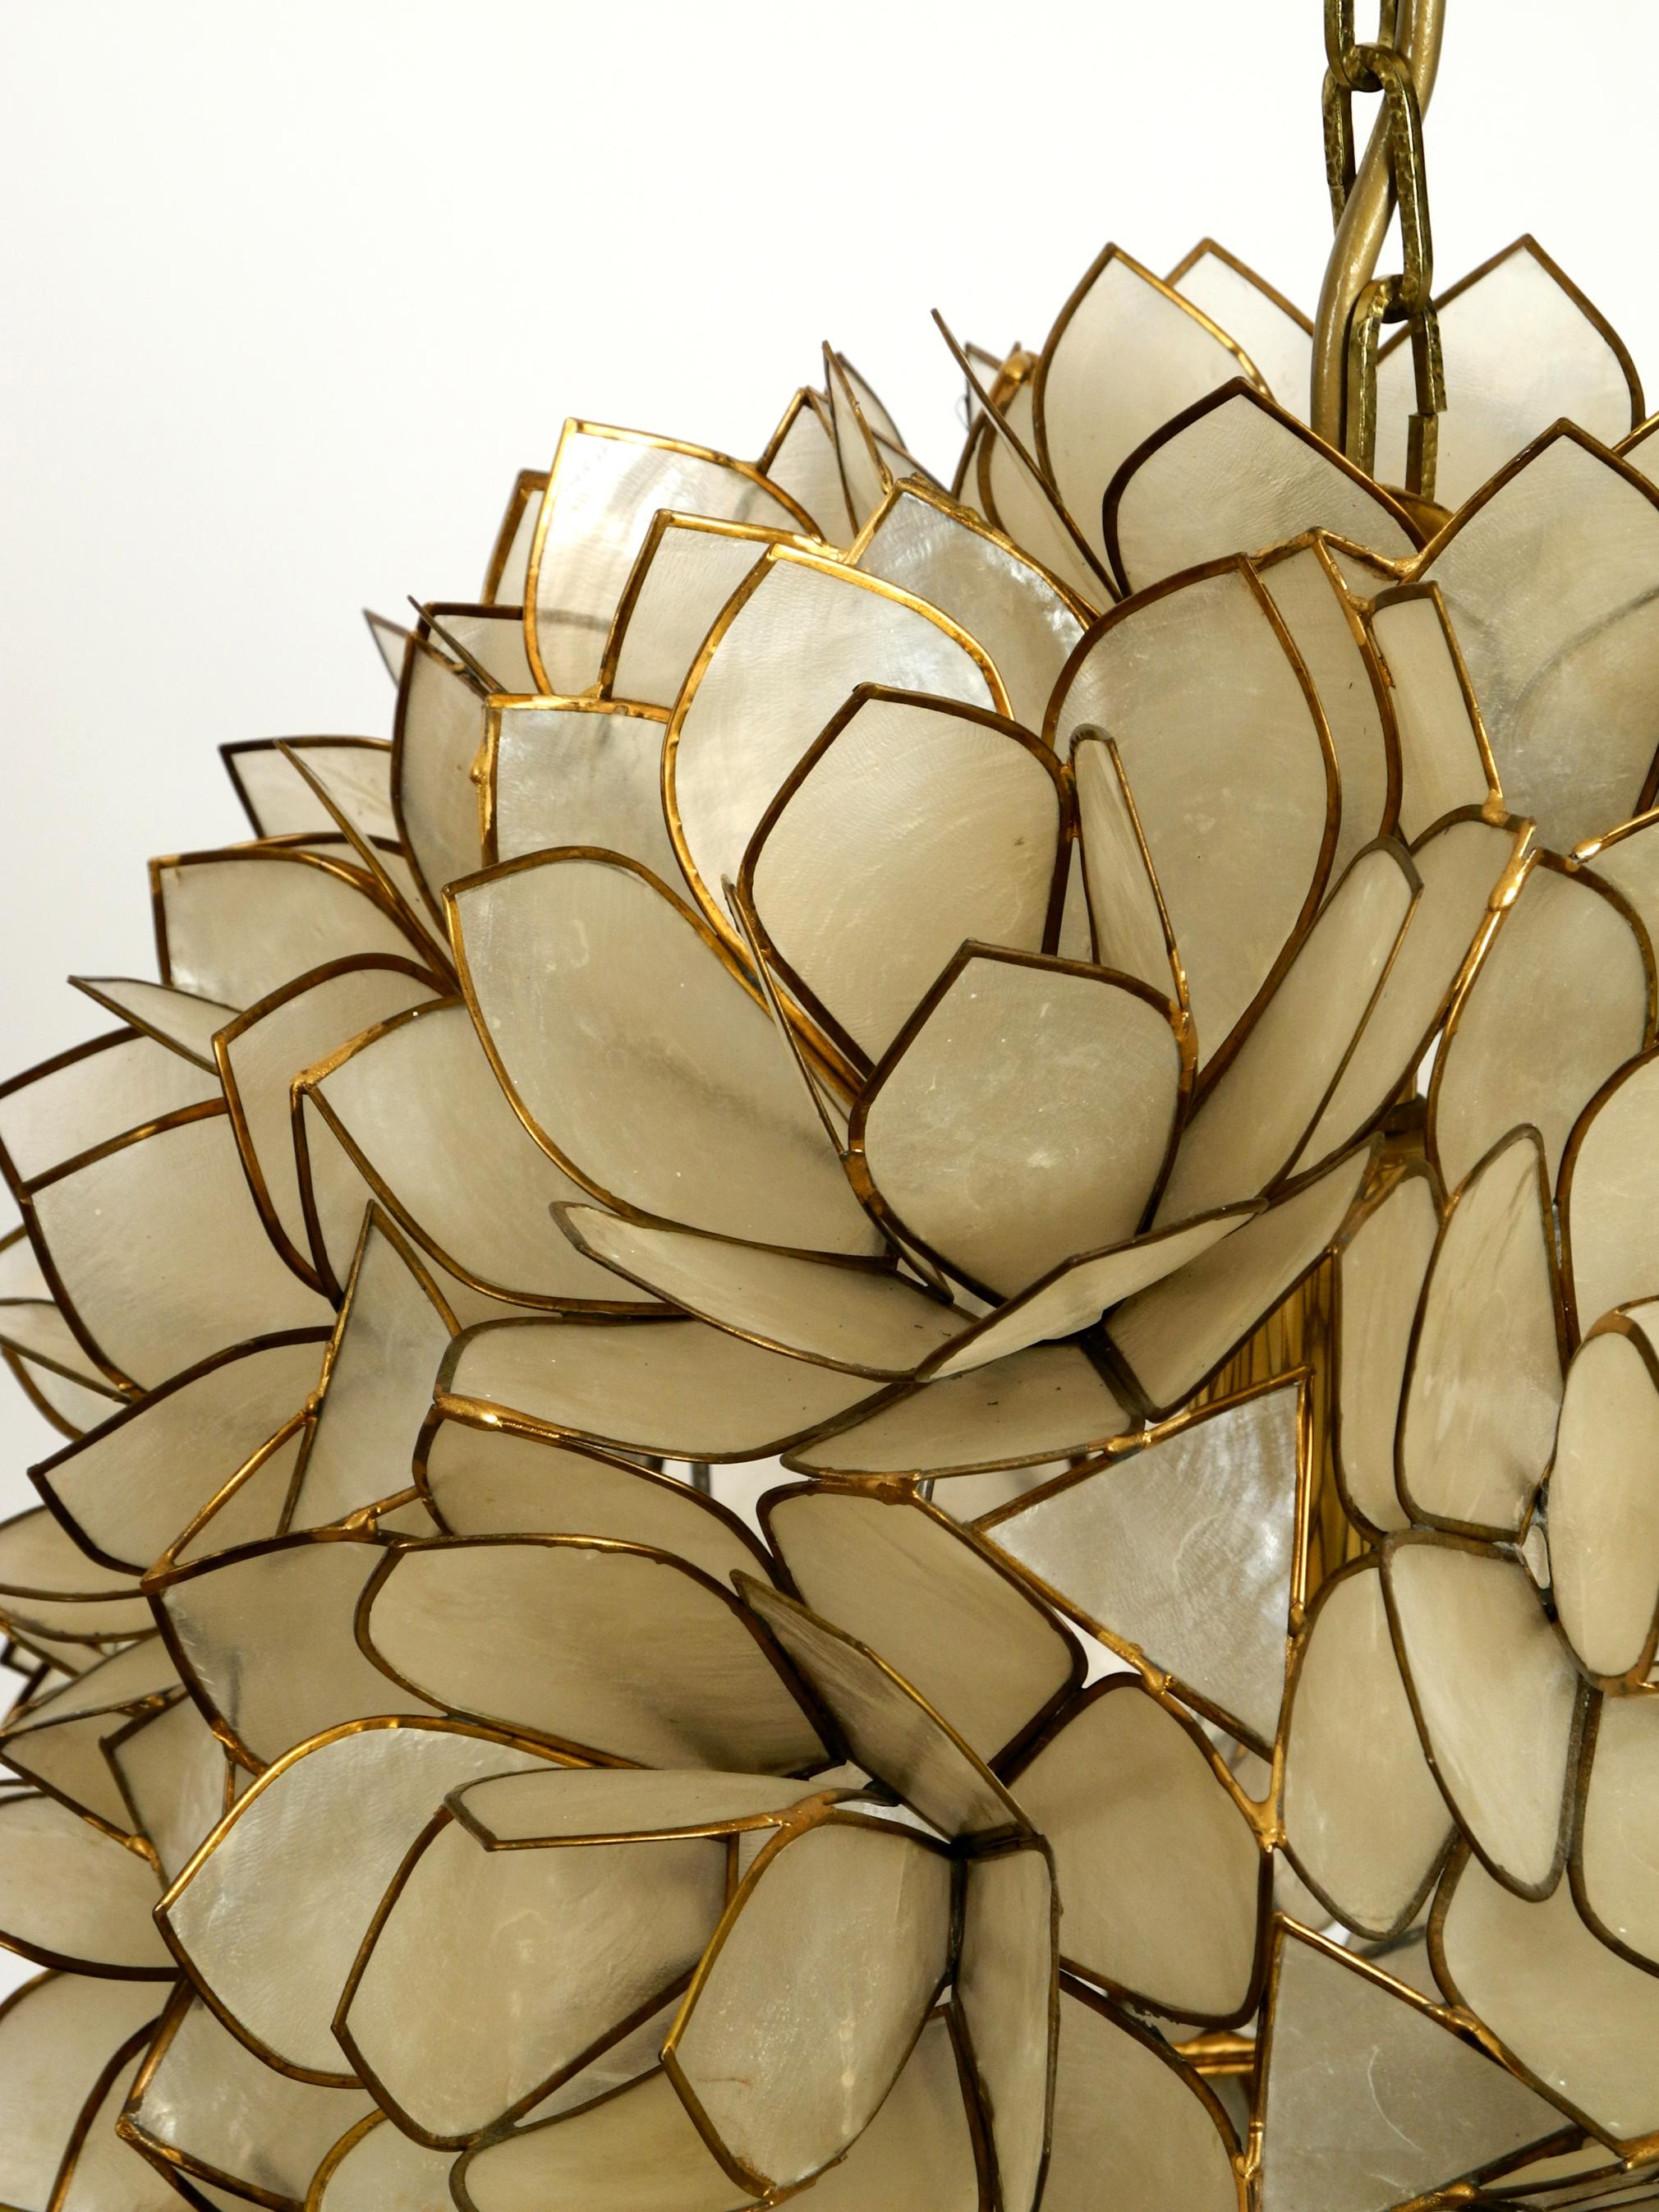 Brass 1970s Spherical Pendant Lamp Made of Mother of Pearl in the Look of a Flower